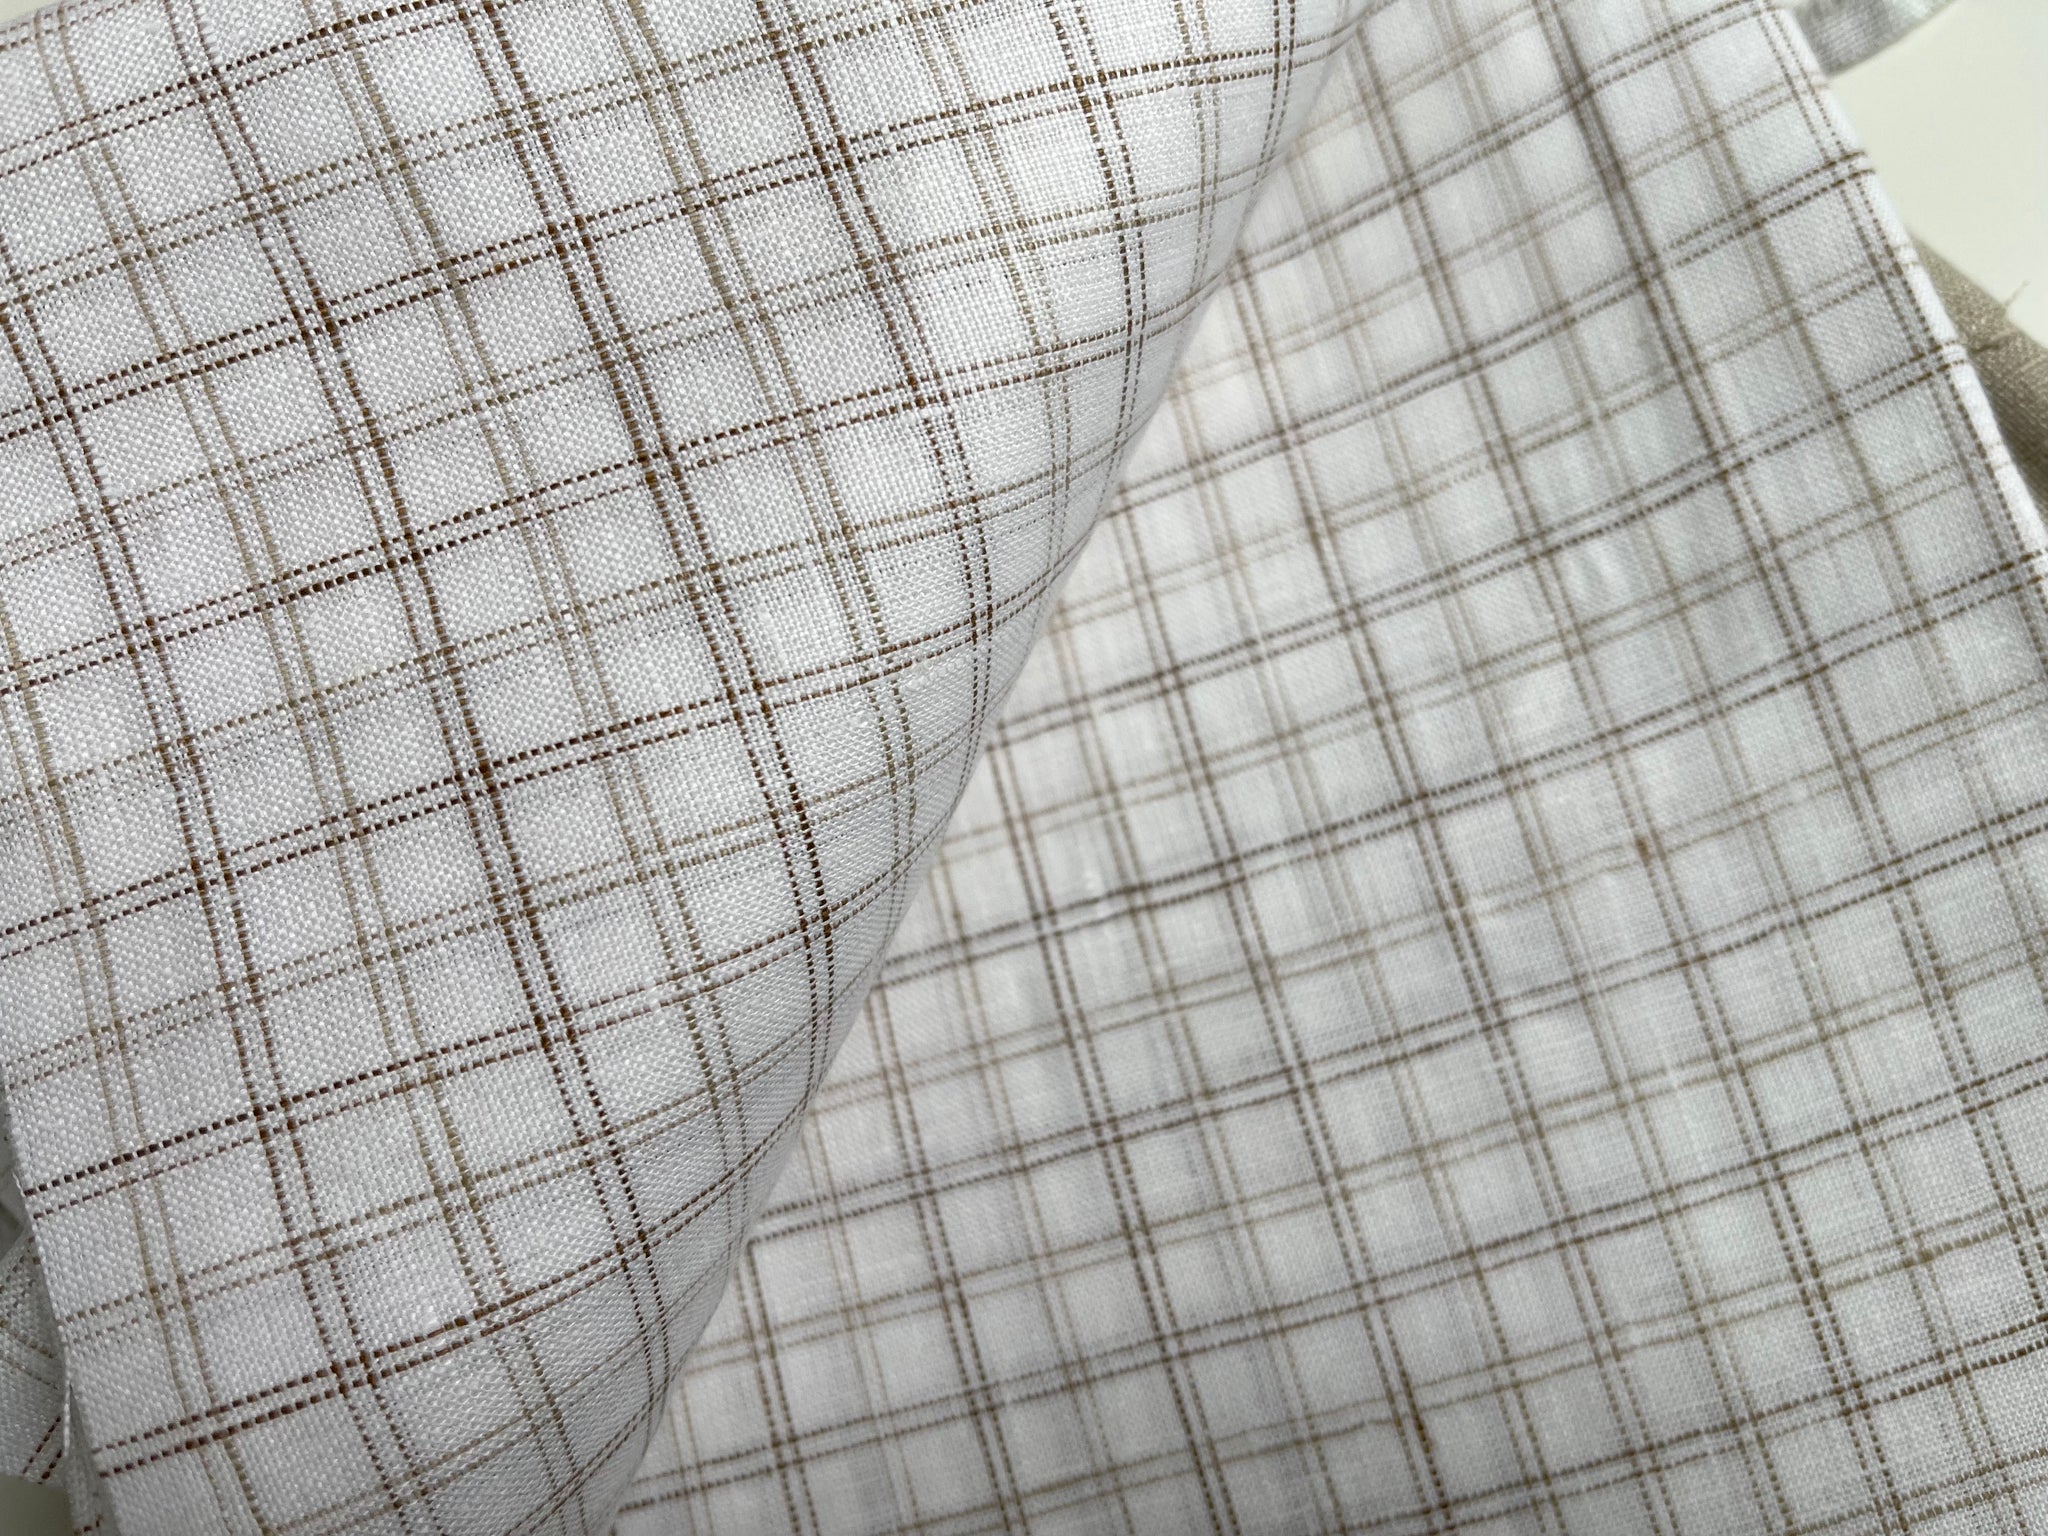 Linen Fabric Remnants - Oatmeal and White Brown Grid Check